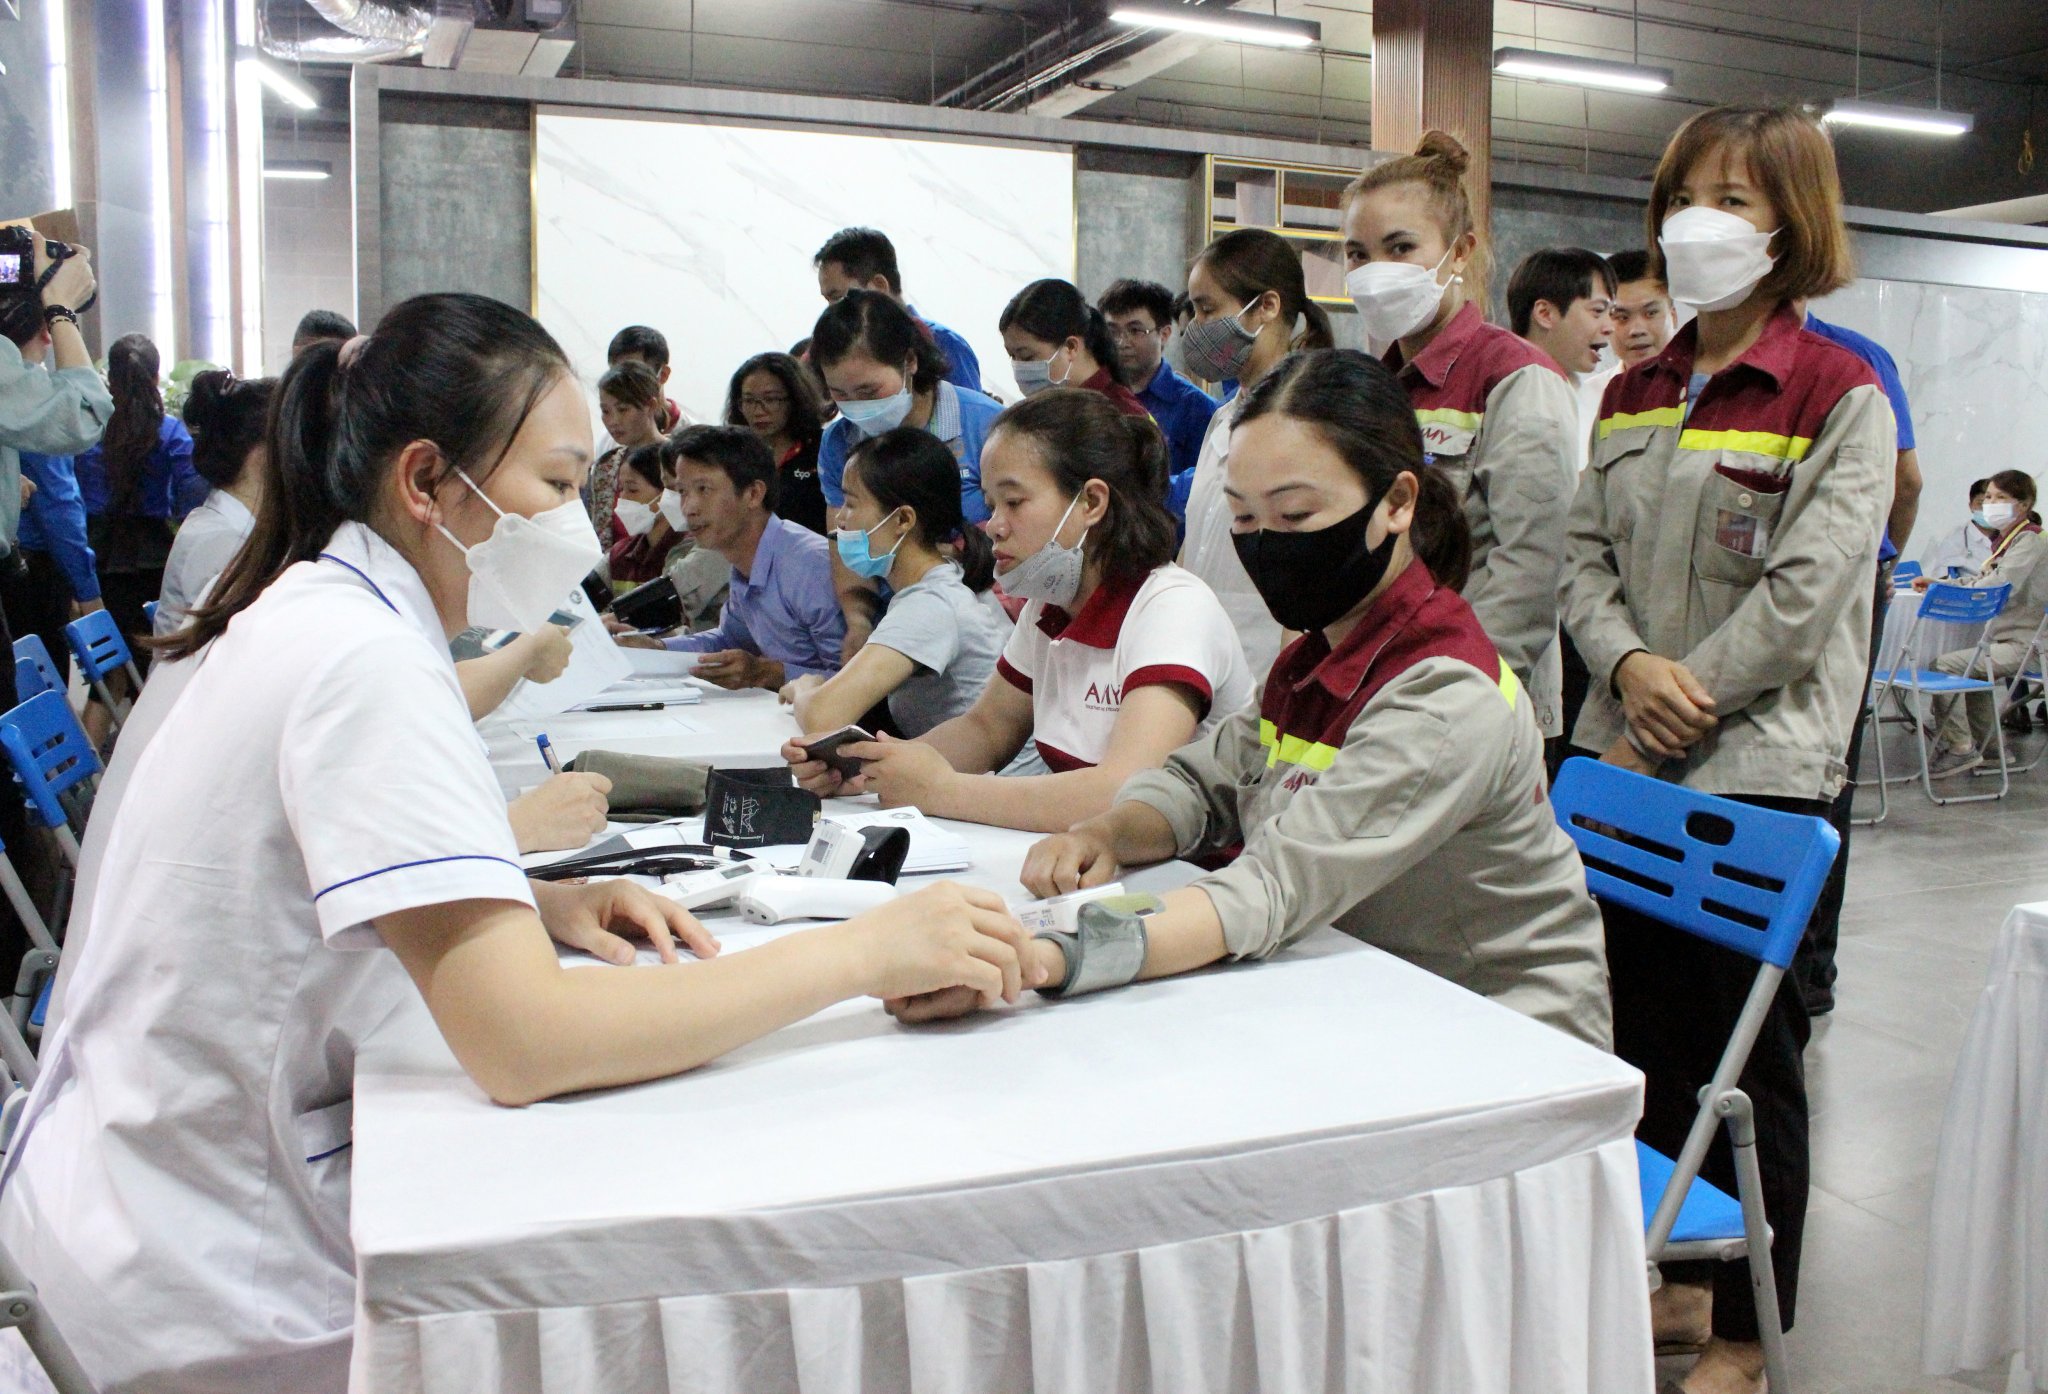 To strengthen health care for workers and prevention of occupational diseases in Vietnam